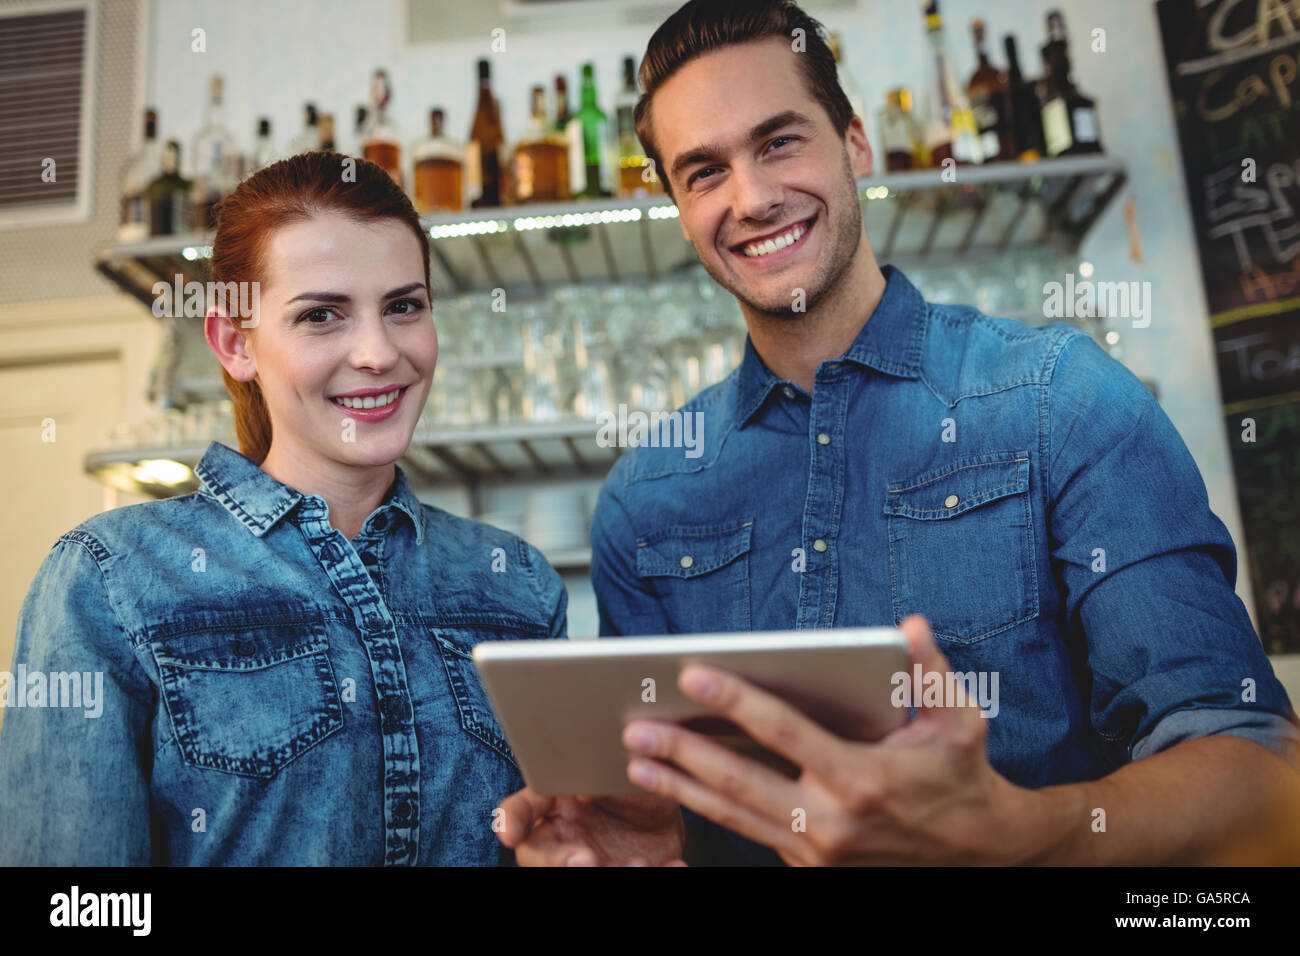 Portrait of cheerful baristas with digital tablet at cafe Banque D'Images